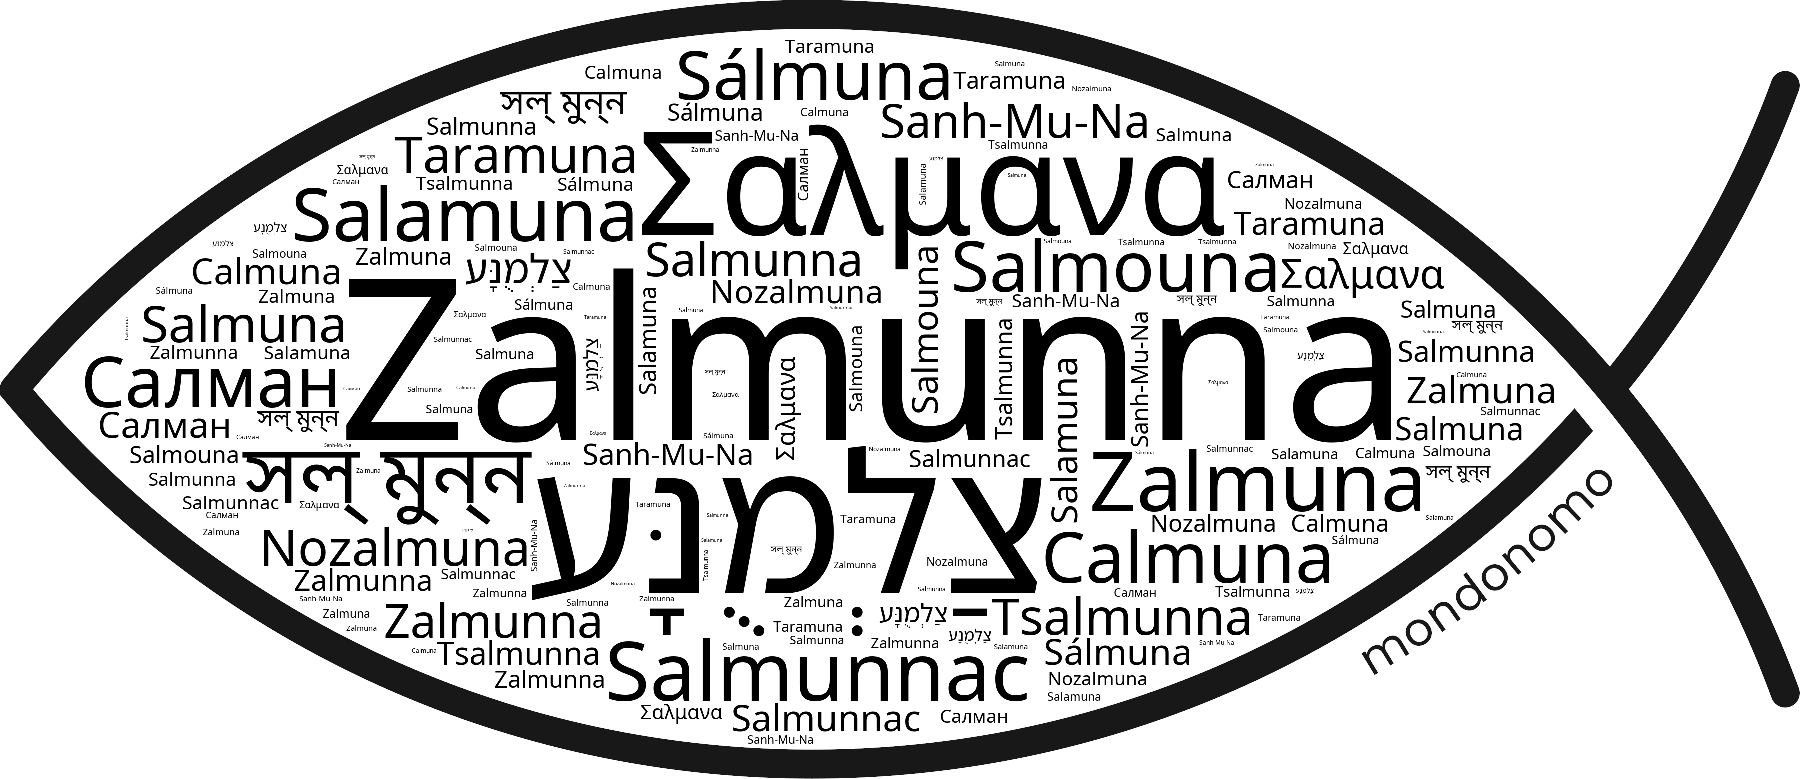 Name Zalmunna in the world's Bibles